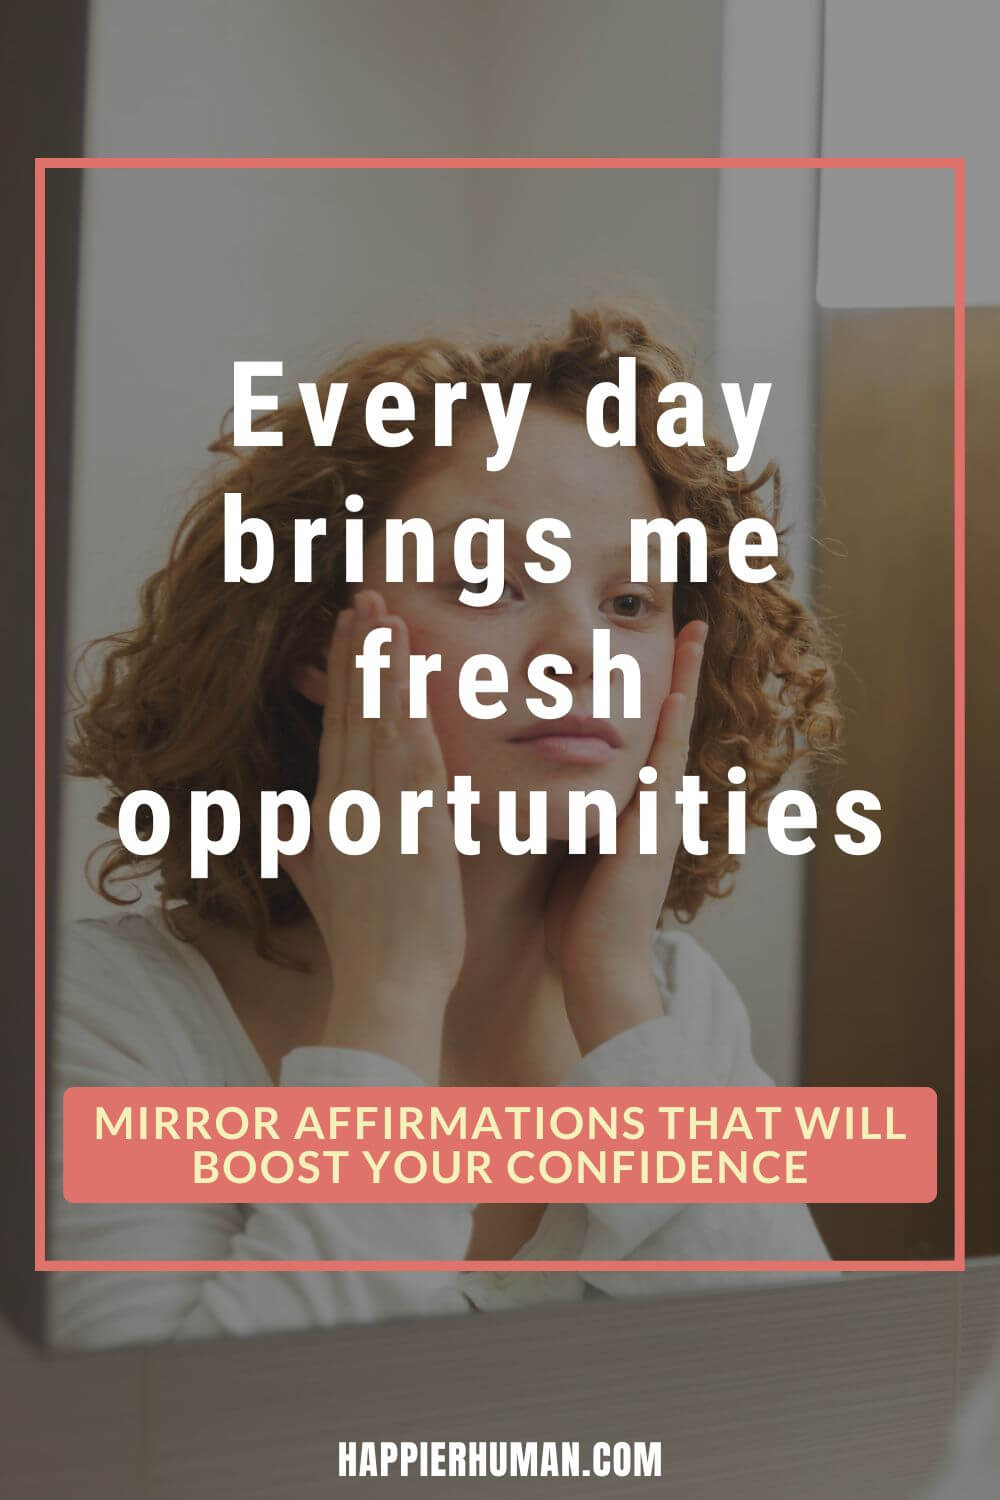 Mirror Affirmations - Every day brings me fresh opportunities | mirror affirmations reddit | 100 mirror affirmations | mirror affirmations pdf